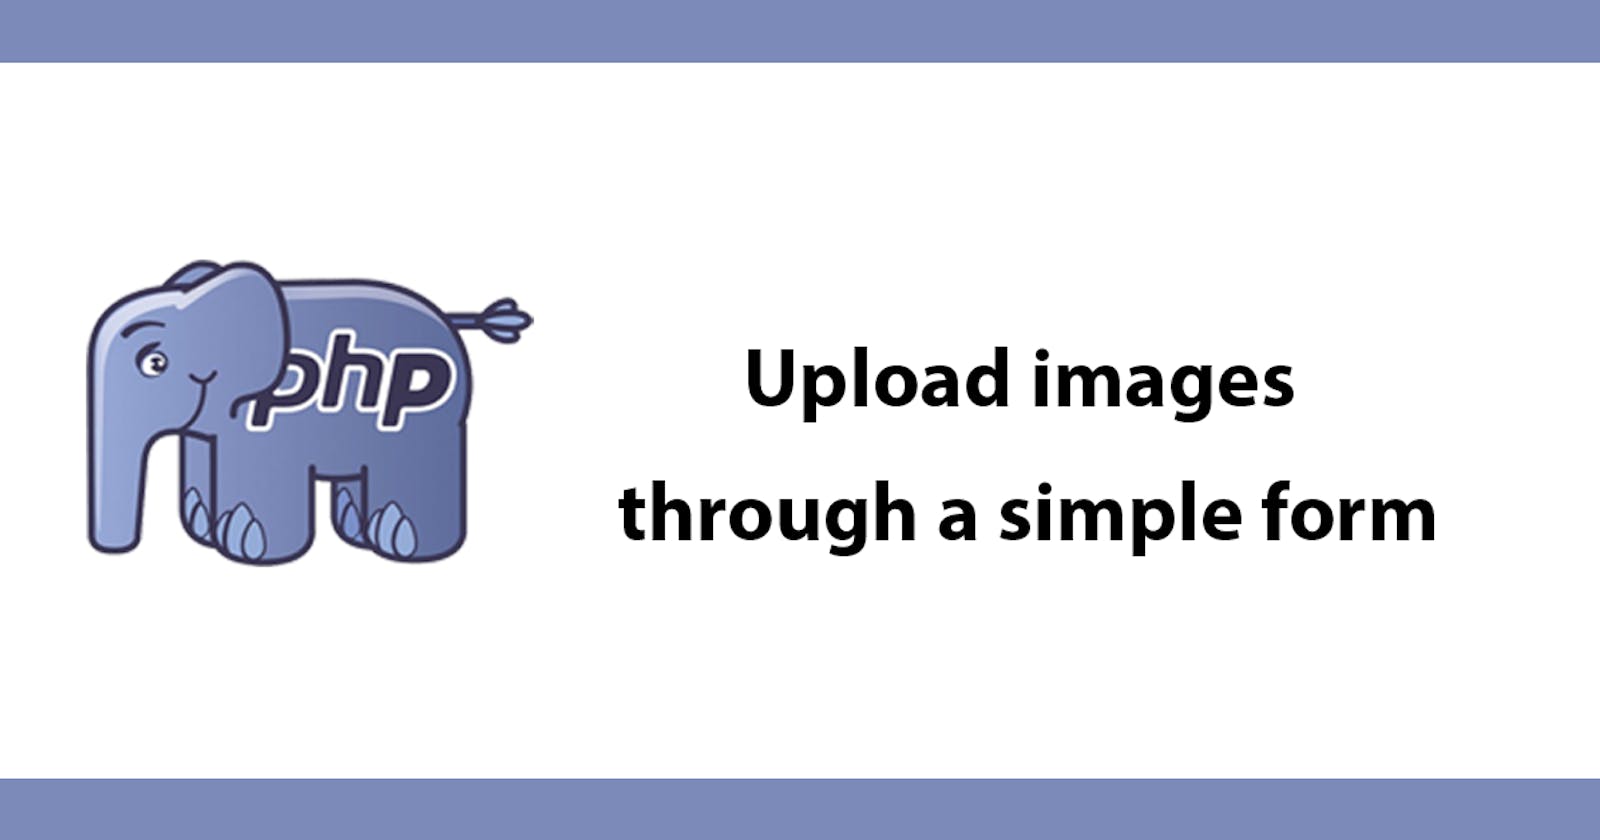 Upload images through a simple form